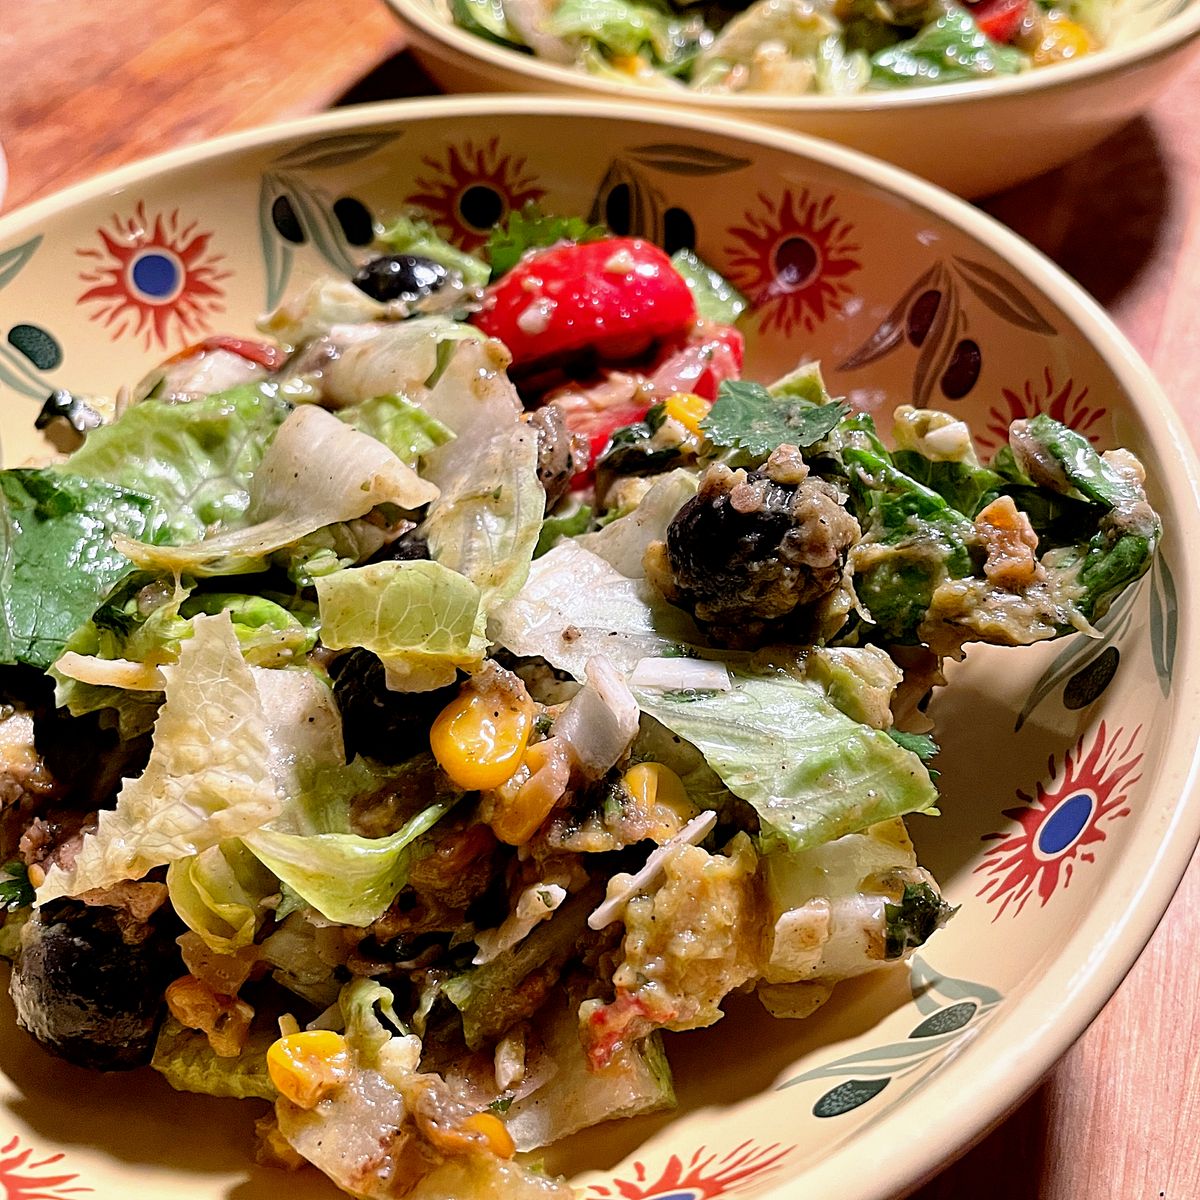 Layered Taco Salad with Jerk Chicken and Guacamole